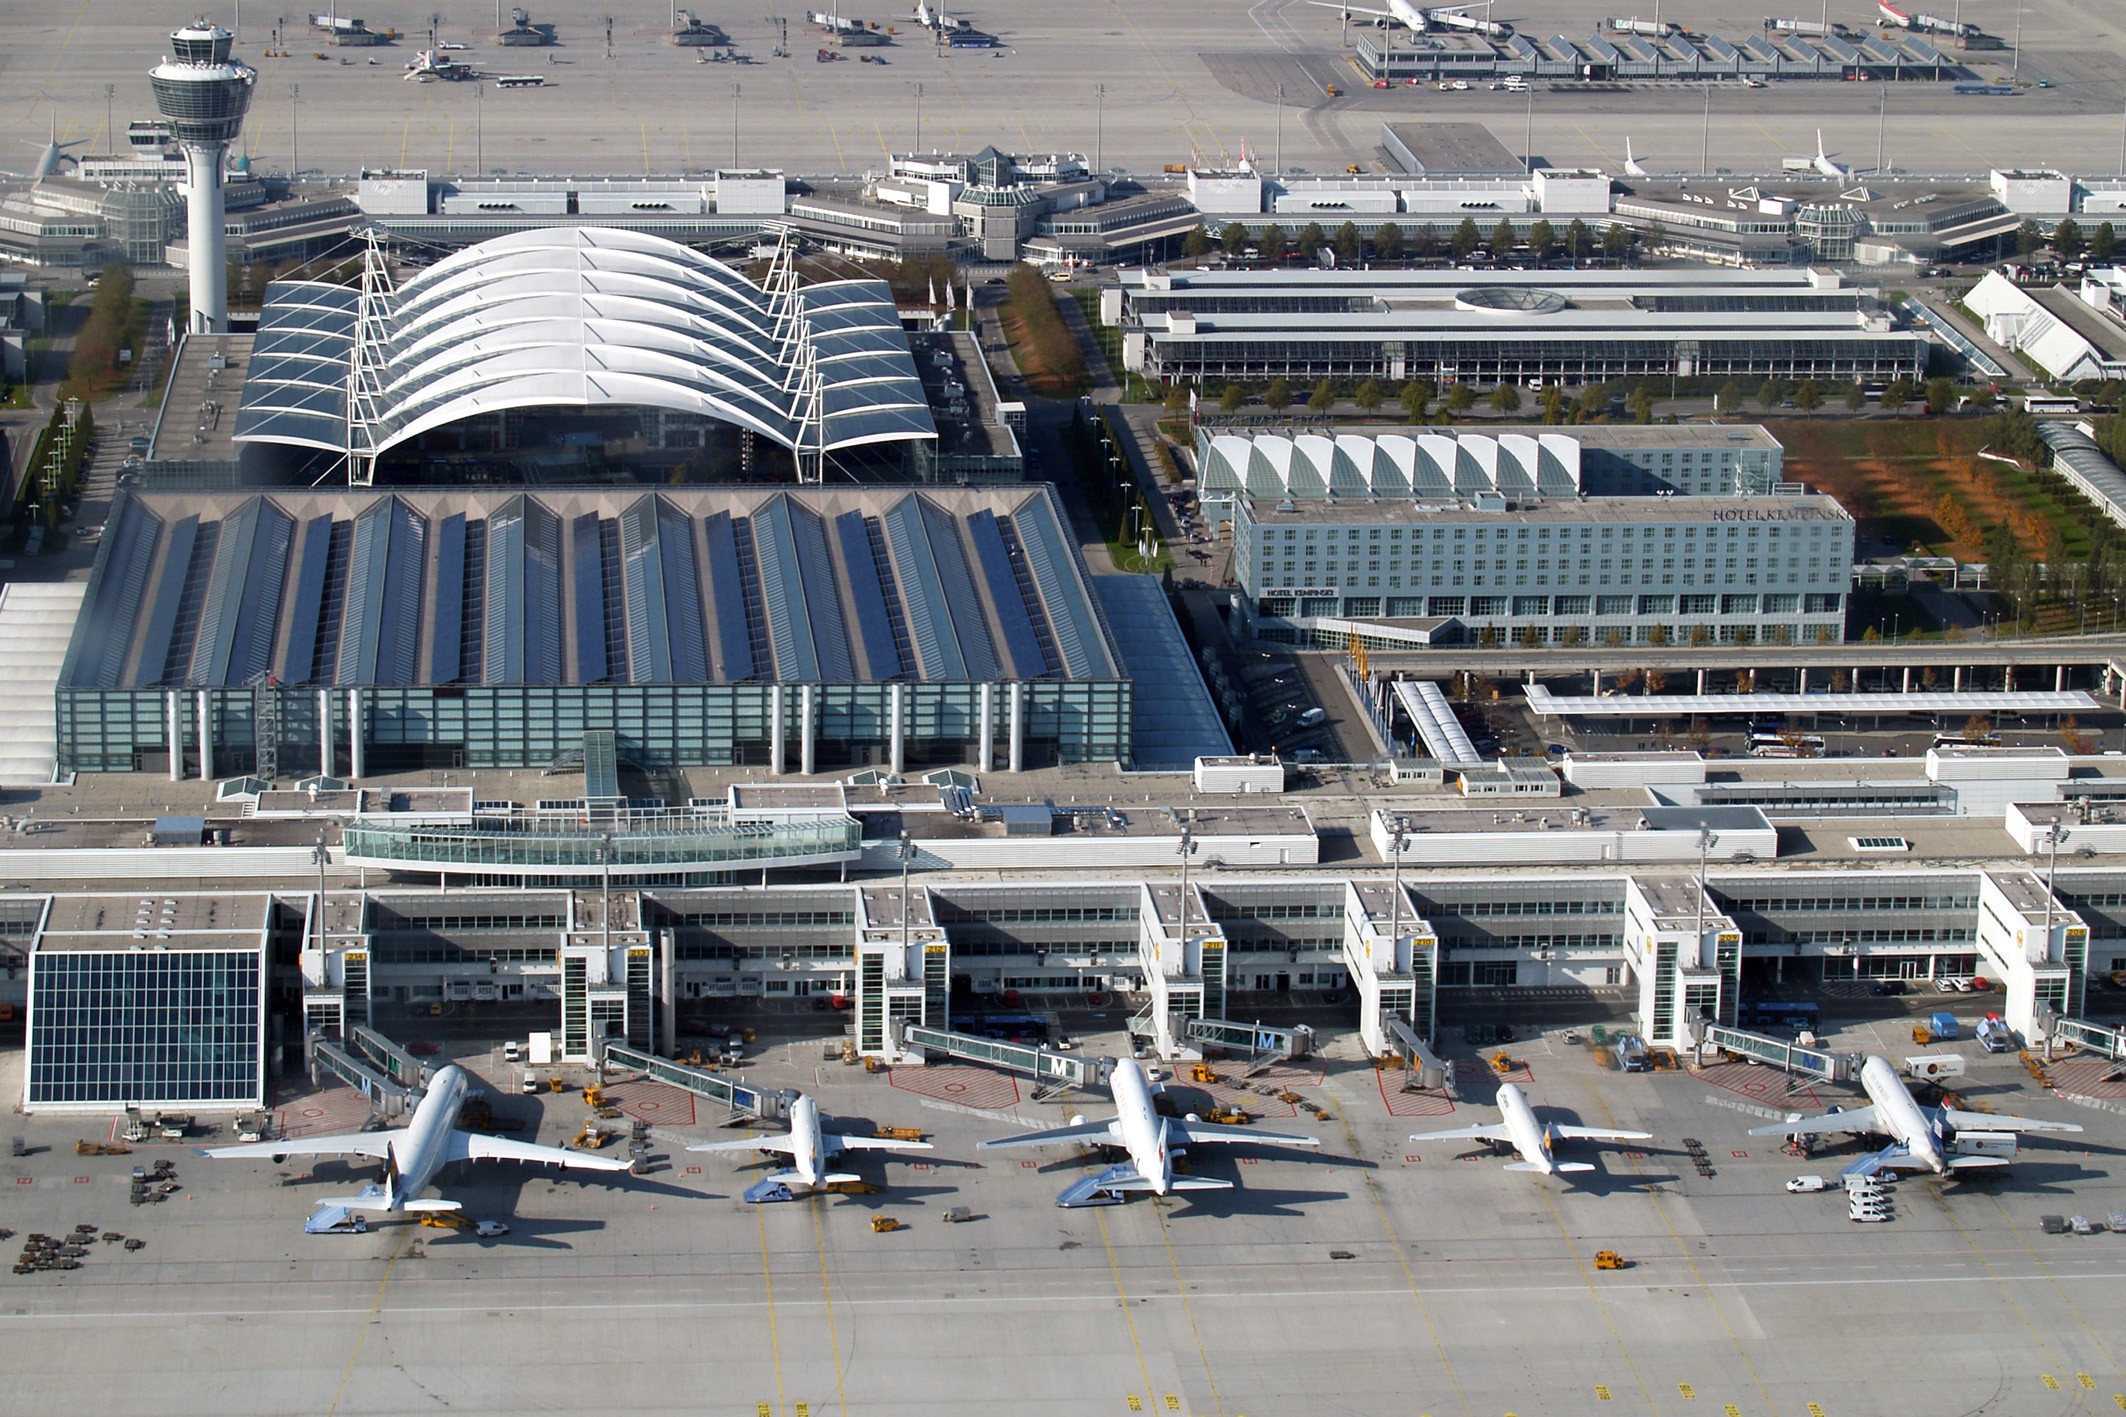 Munich airport – travel guide at wikivoyage